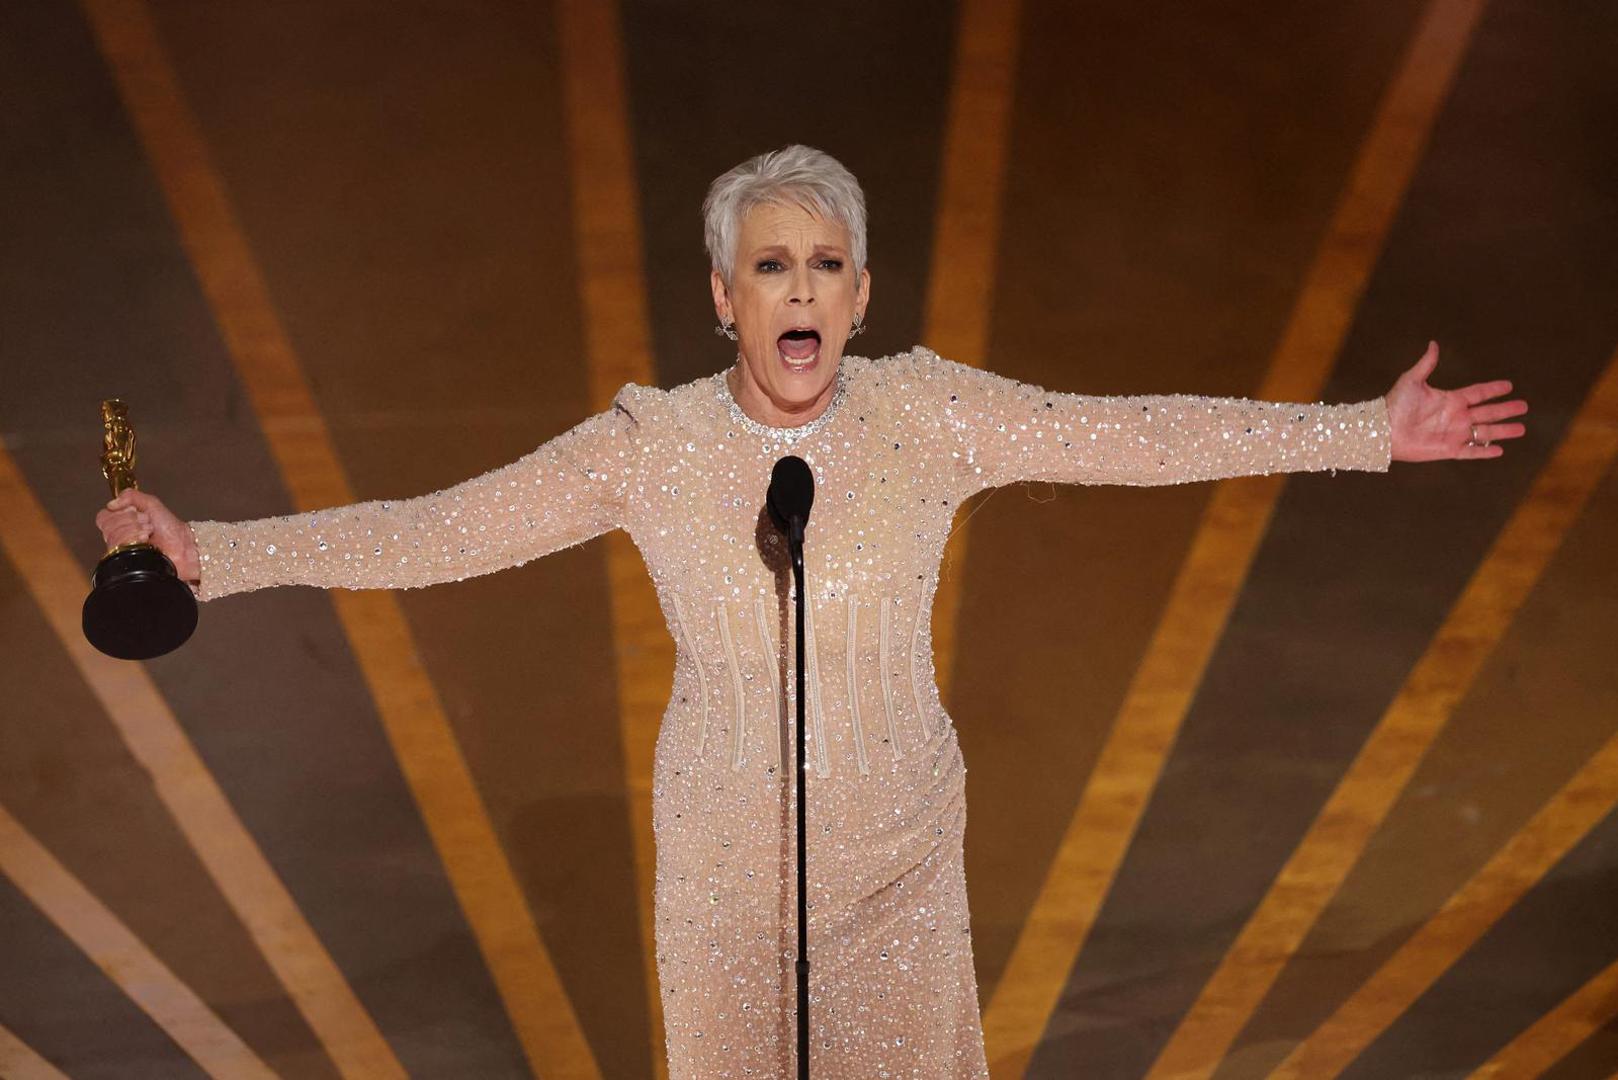 Jamie Lee Curtis wins the Oscar for Best Supporting Actress for "Everything Everywhere All at Once" during the Oscars show at the 95th Academy Awards in Hollywood, Los Angeles, California, U.S., March 12, 2023. REUTERS/Carlos Barria     TPX IMAGES OF THE DAY Photo: CARLOS BARRIA/REUTERS